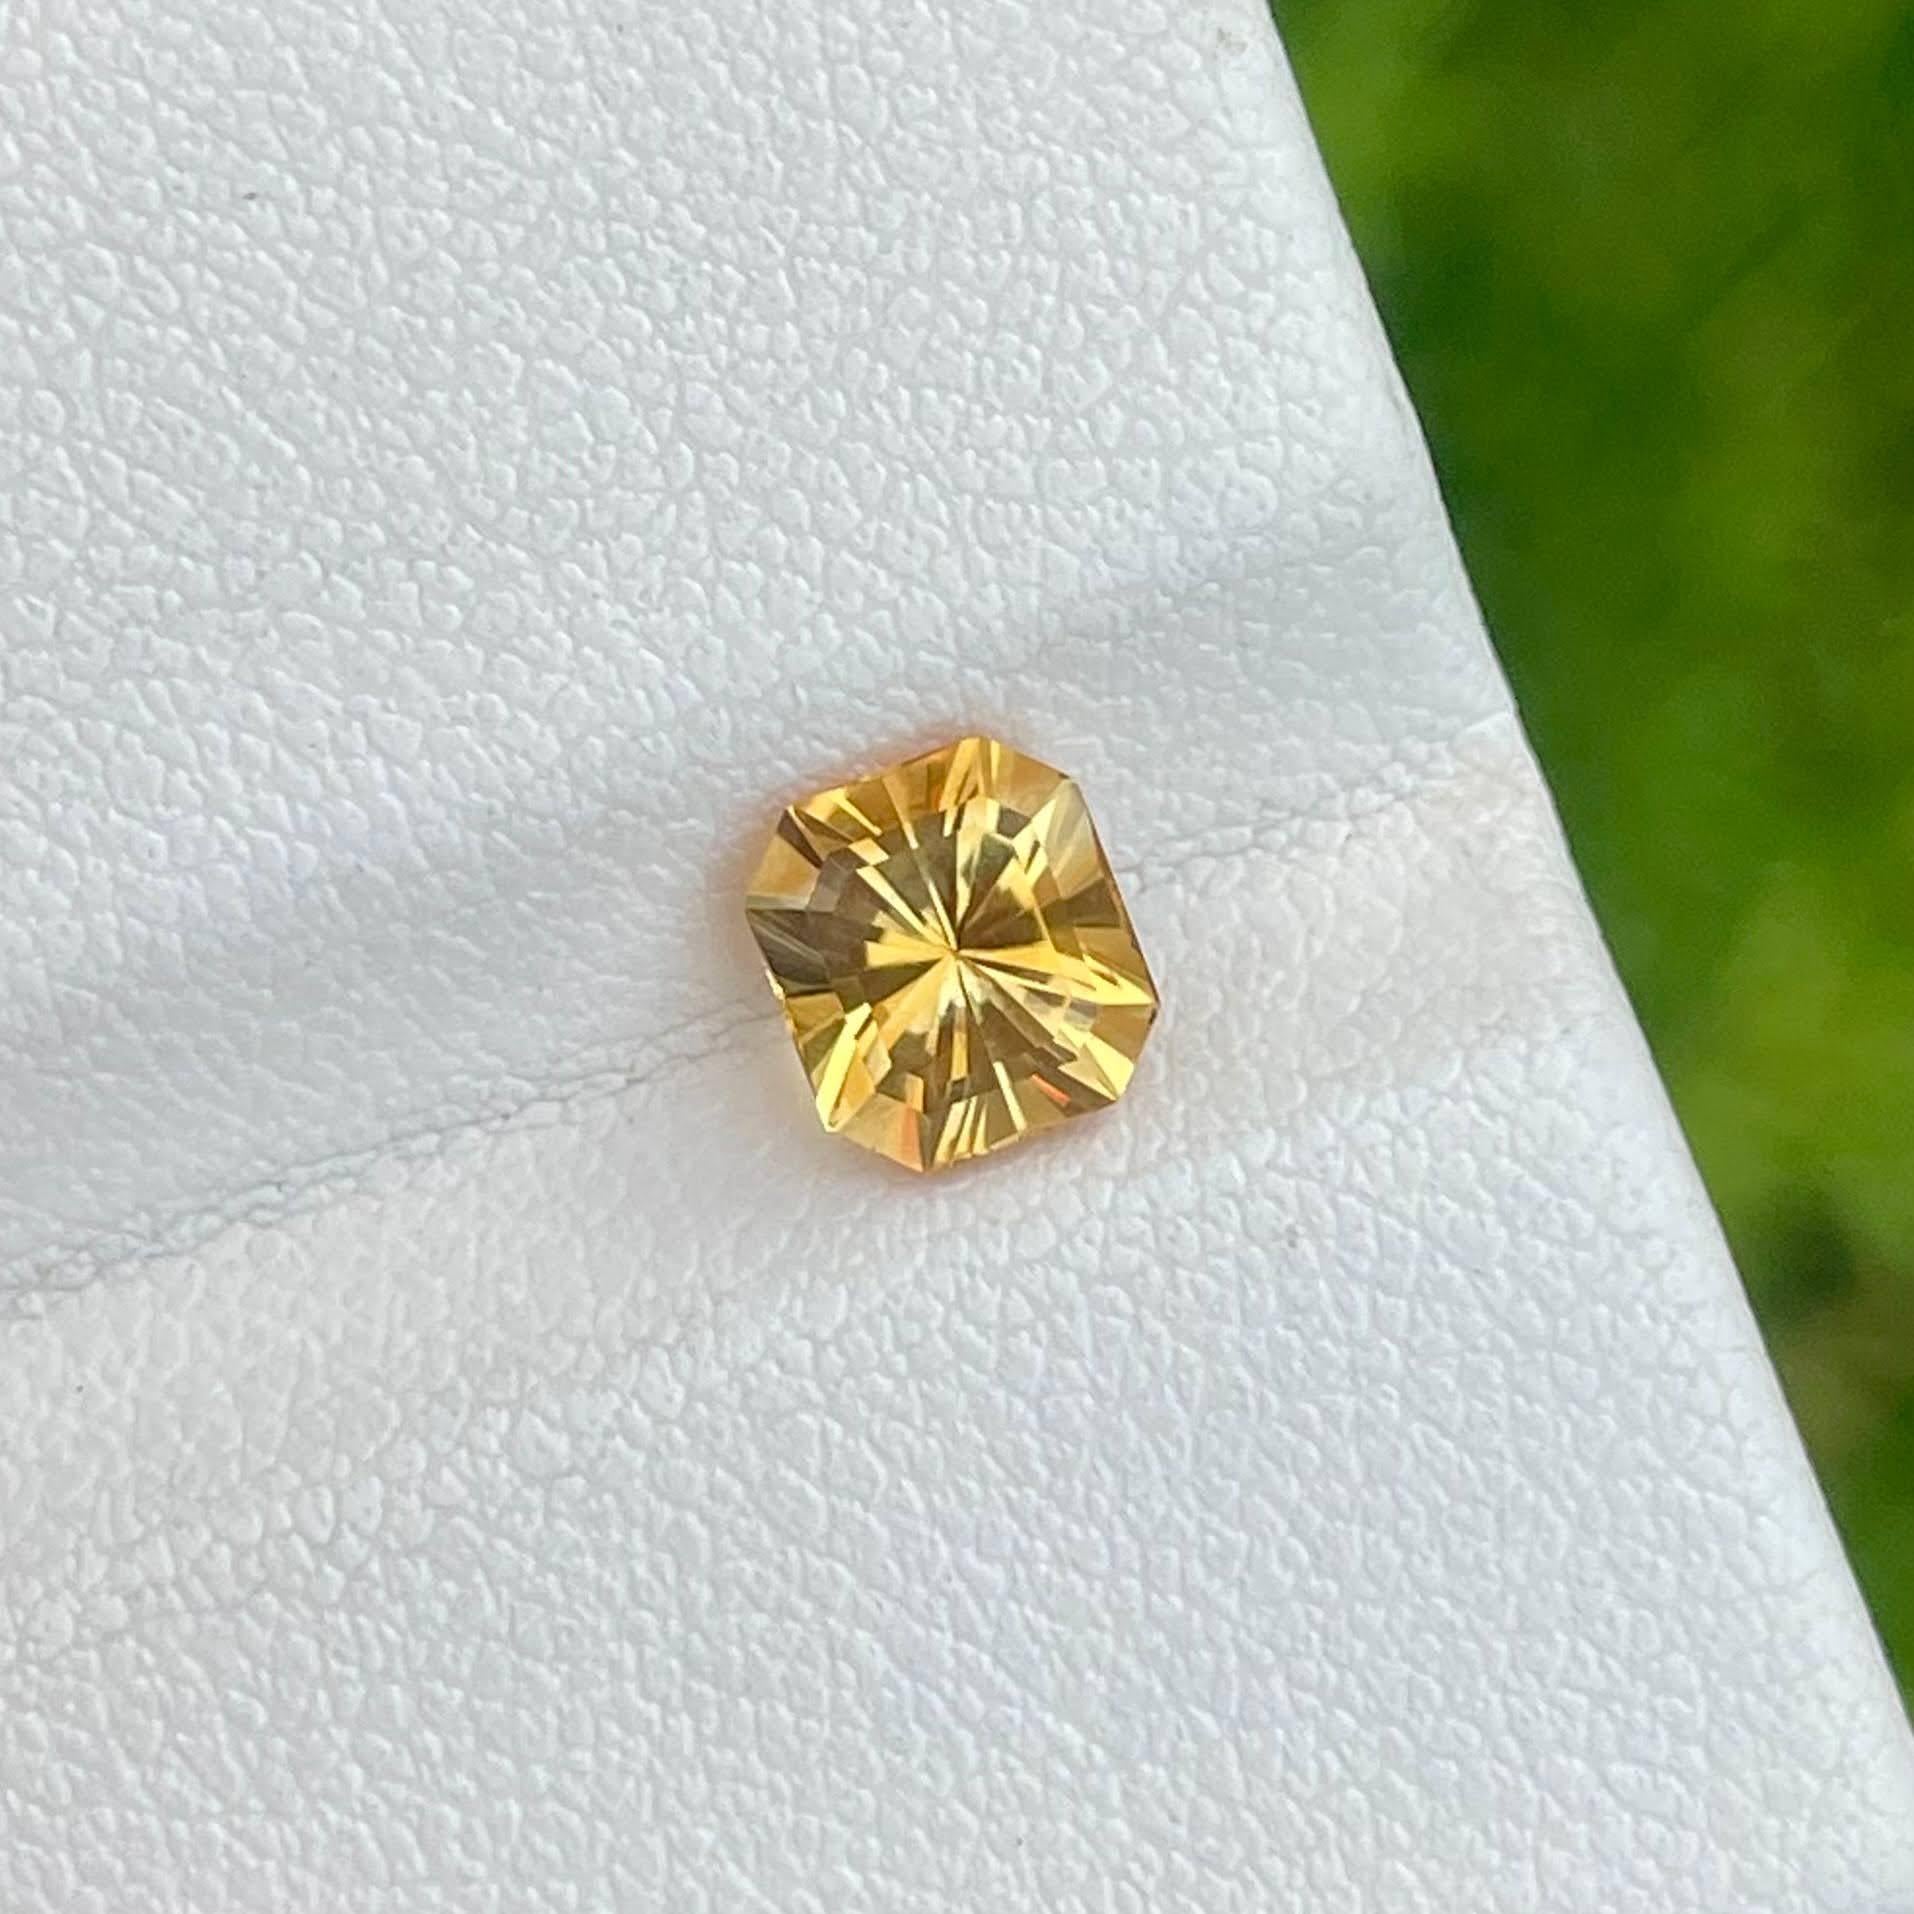 Weight 1.05 carats 
Dimensions 6.4x5.8x4.6 mm 
Treatment none 
Origin Brazil 
Clarity loupe clean 
Shape octagon
Cut custom precision 




Crafted with meticulous precision, this 1.05 carats Citrine Stone embodies the epitome of natural beauty and